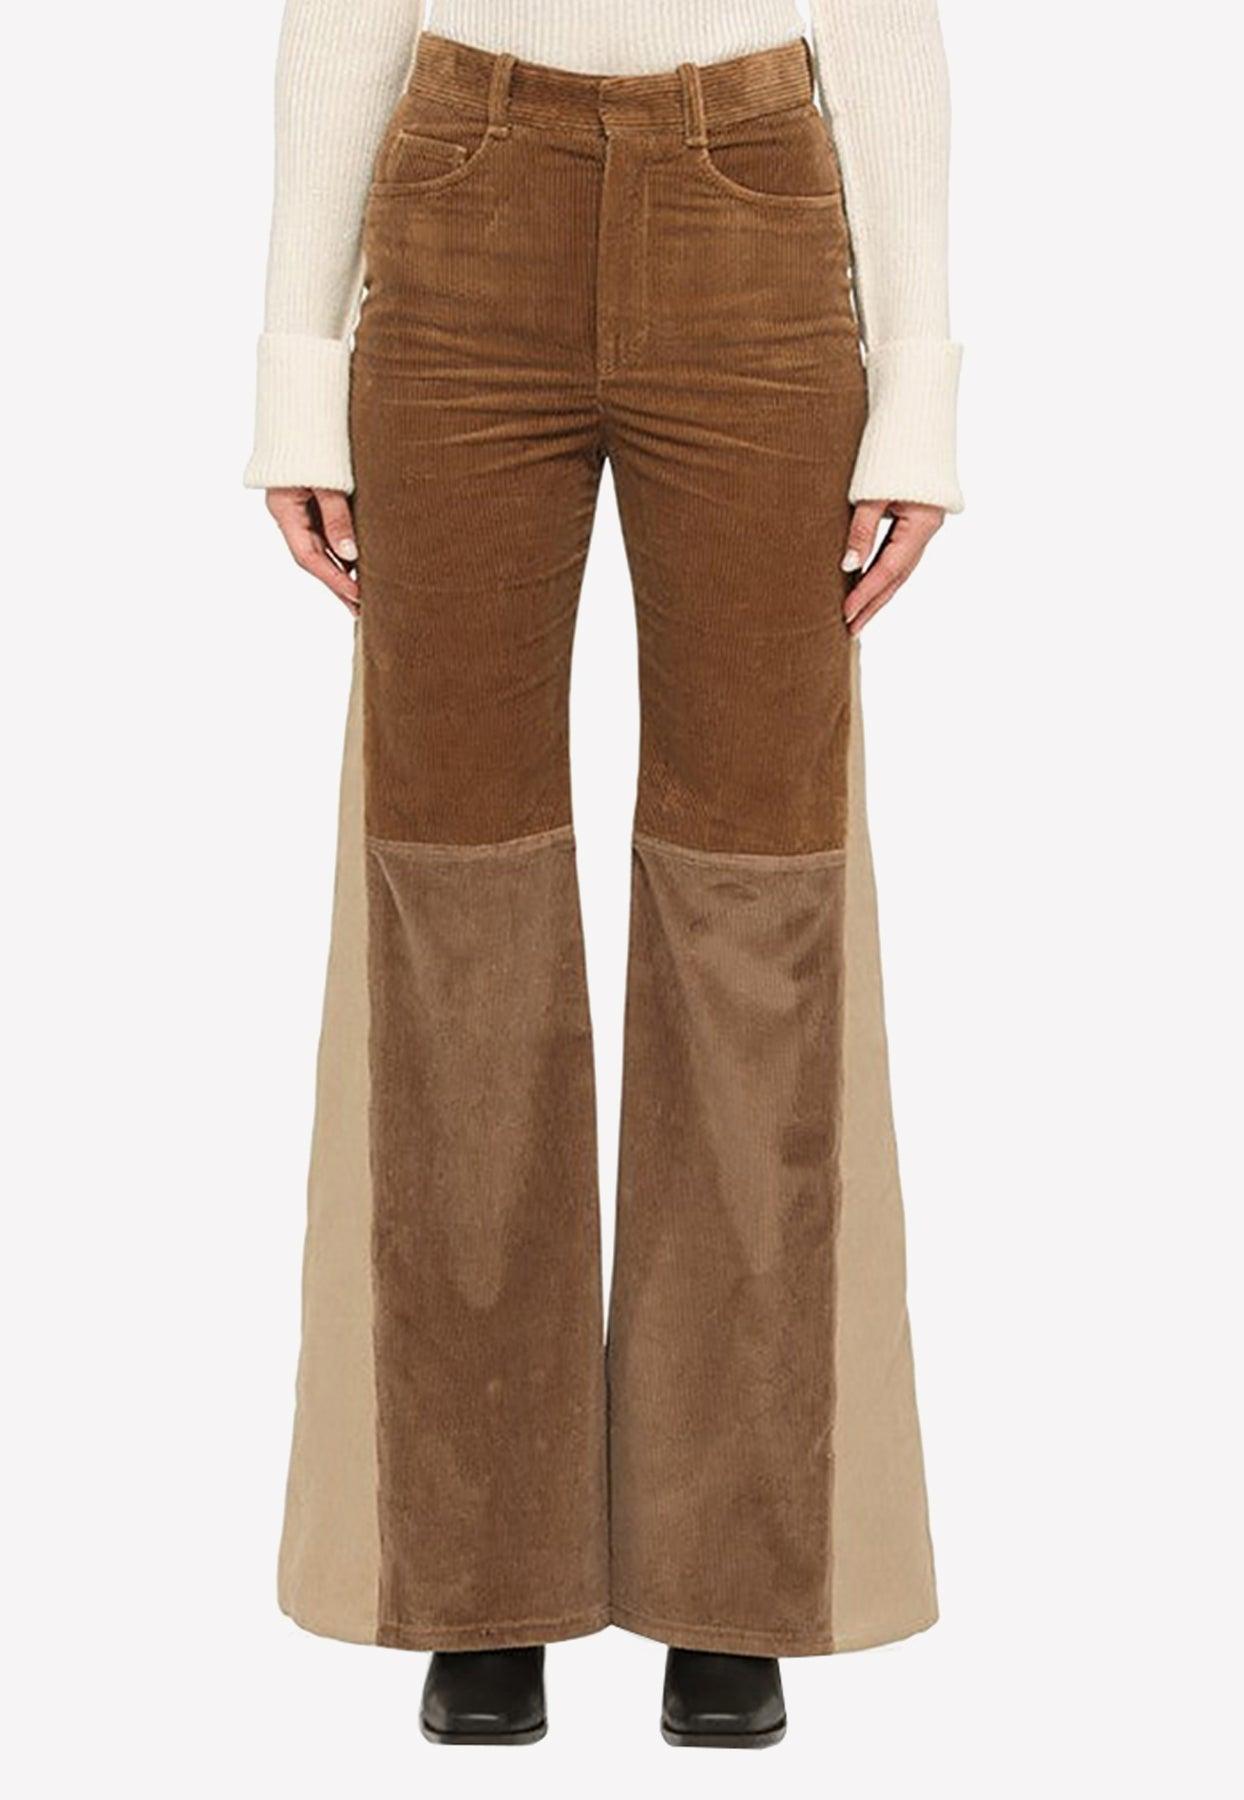 Chloé Paneled Flared Corduroy Pants in Brown | Lyst